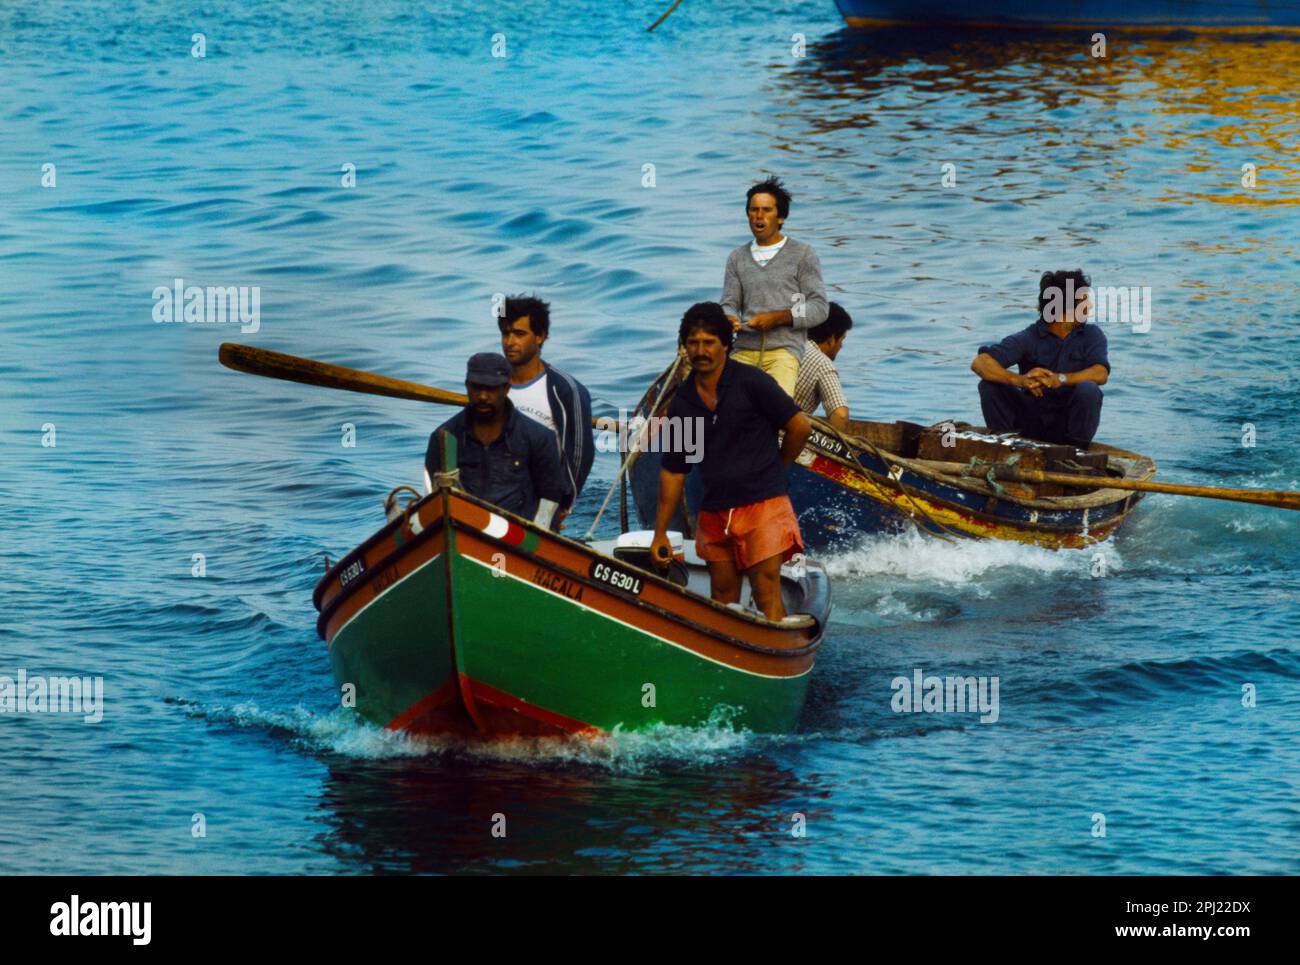 Cascais Portugal Sardine Fishermen with Motorboat Towing Men on Rowing Boat Stock Photo